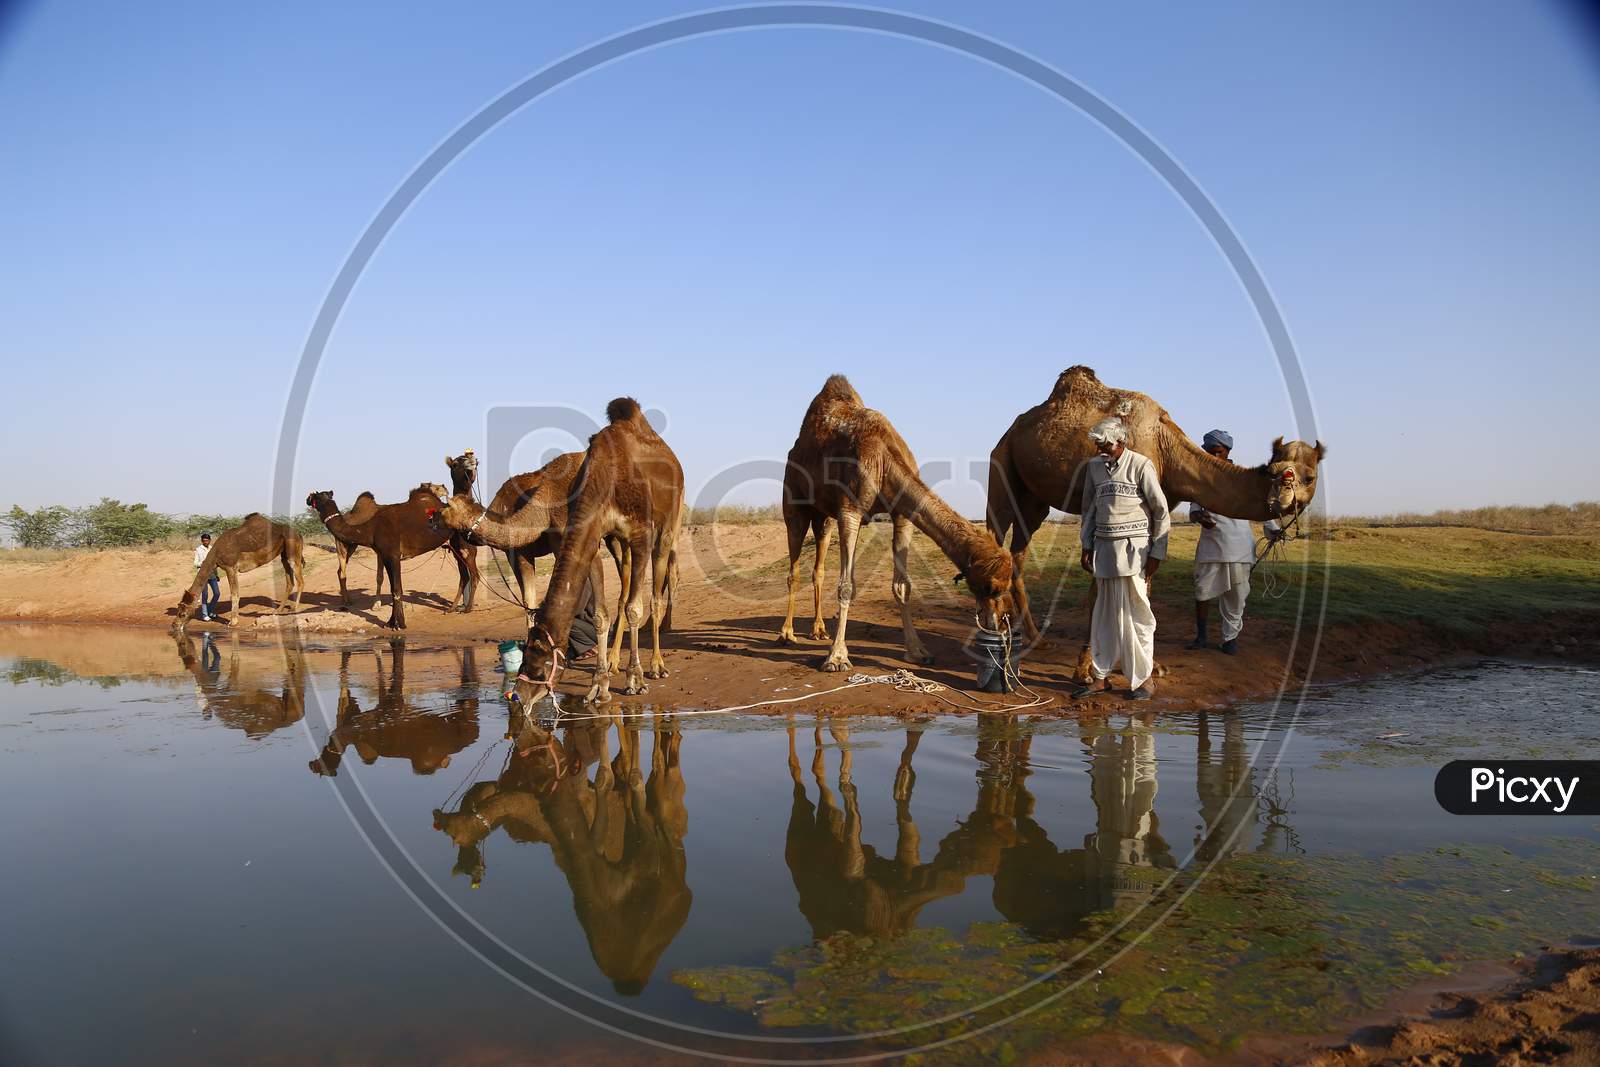 Herd of Camels Drinking Water At a Lake In Nagaur Cattle Fair, Nagaur